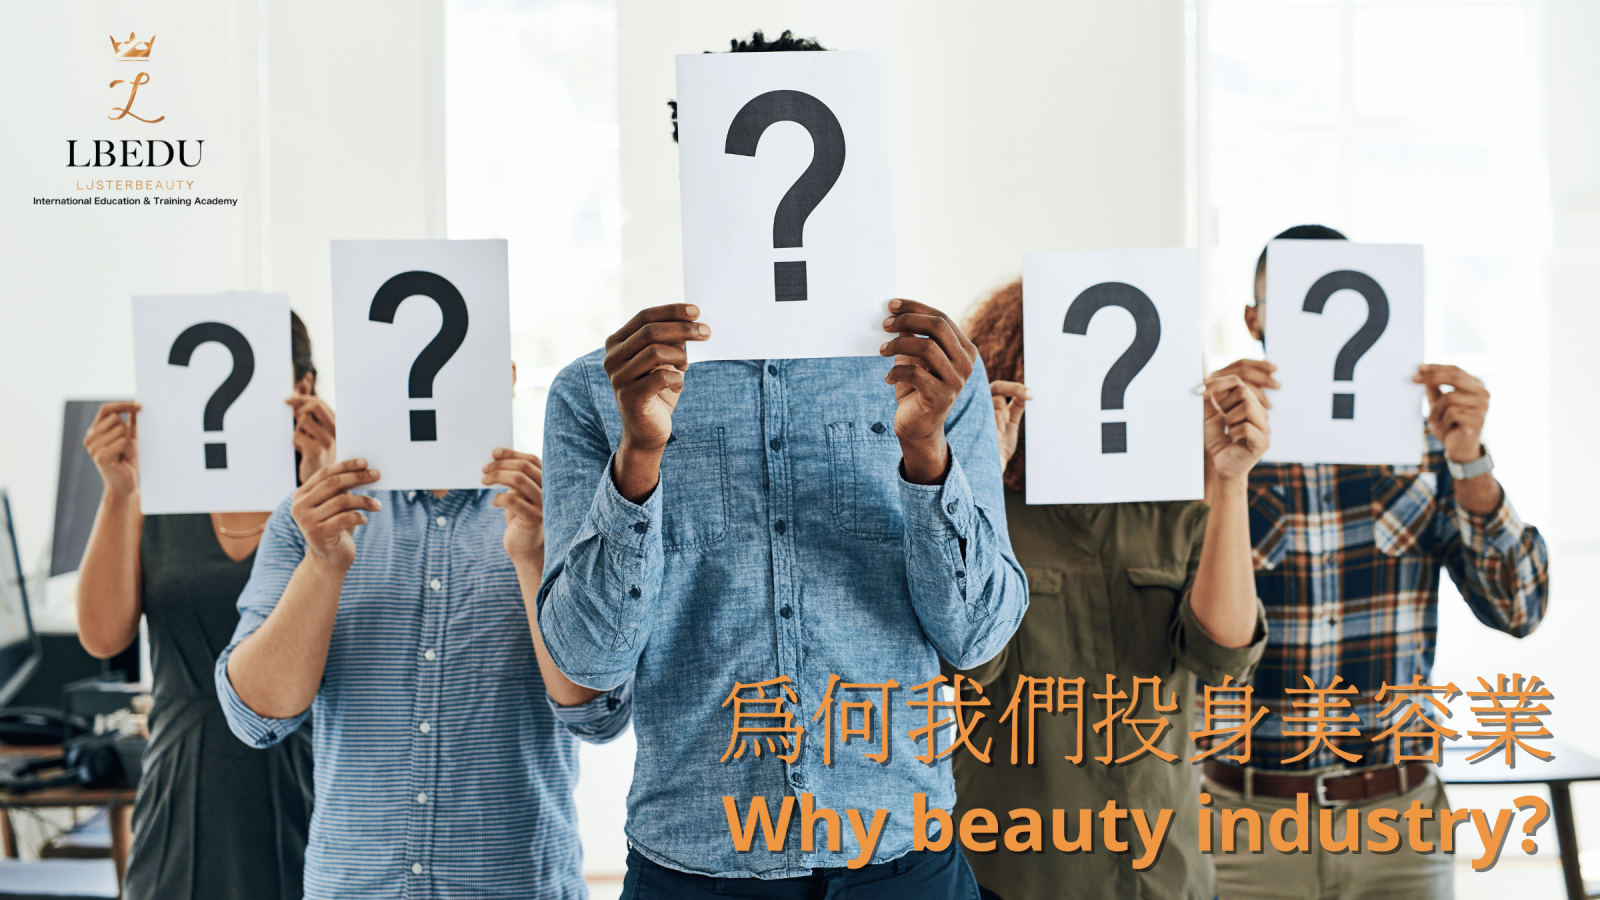 Why we enter the beauty industry?